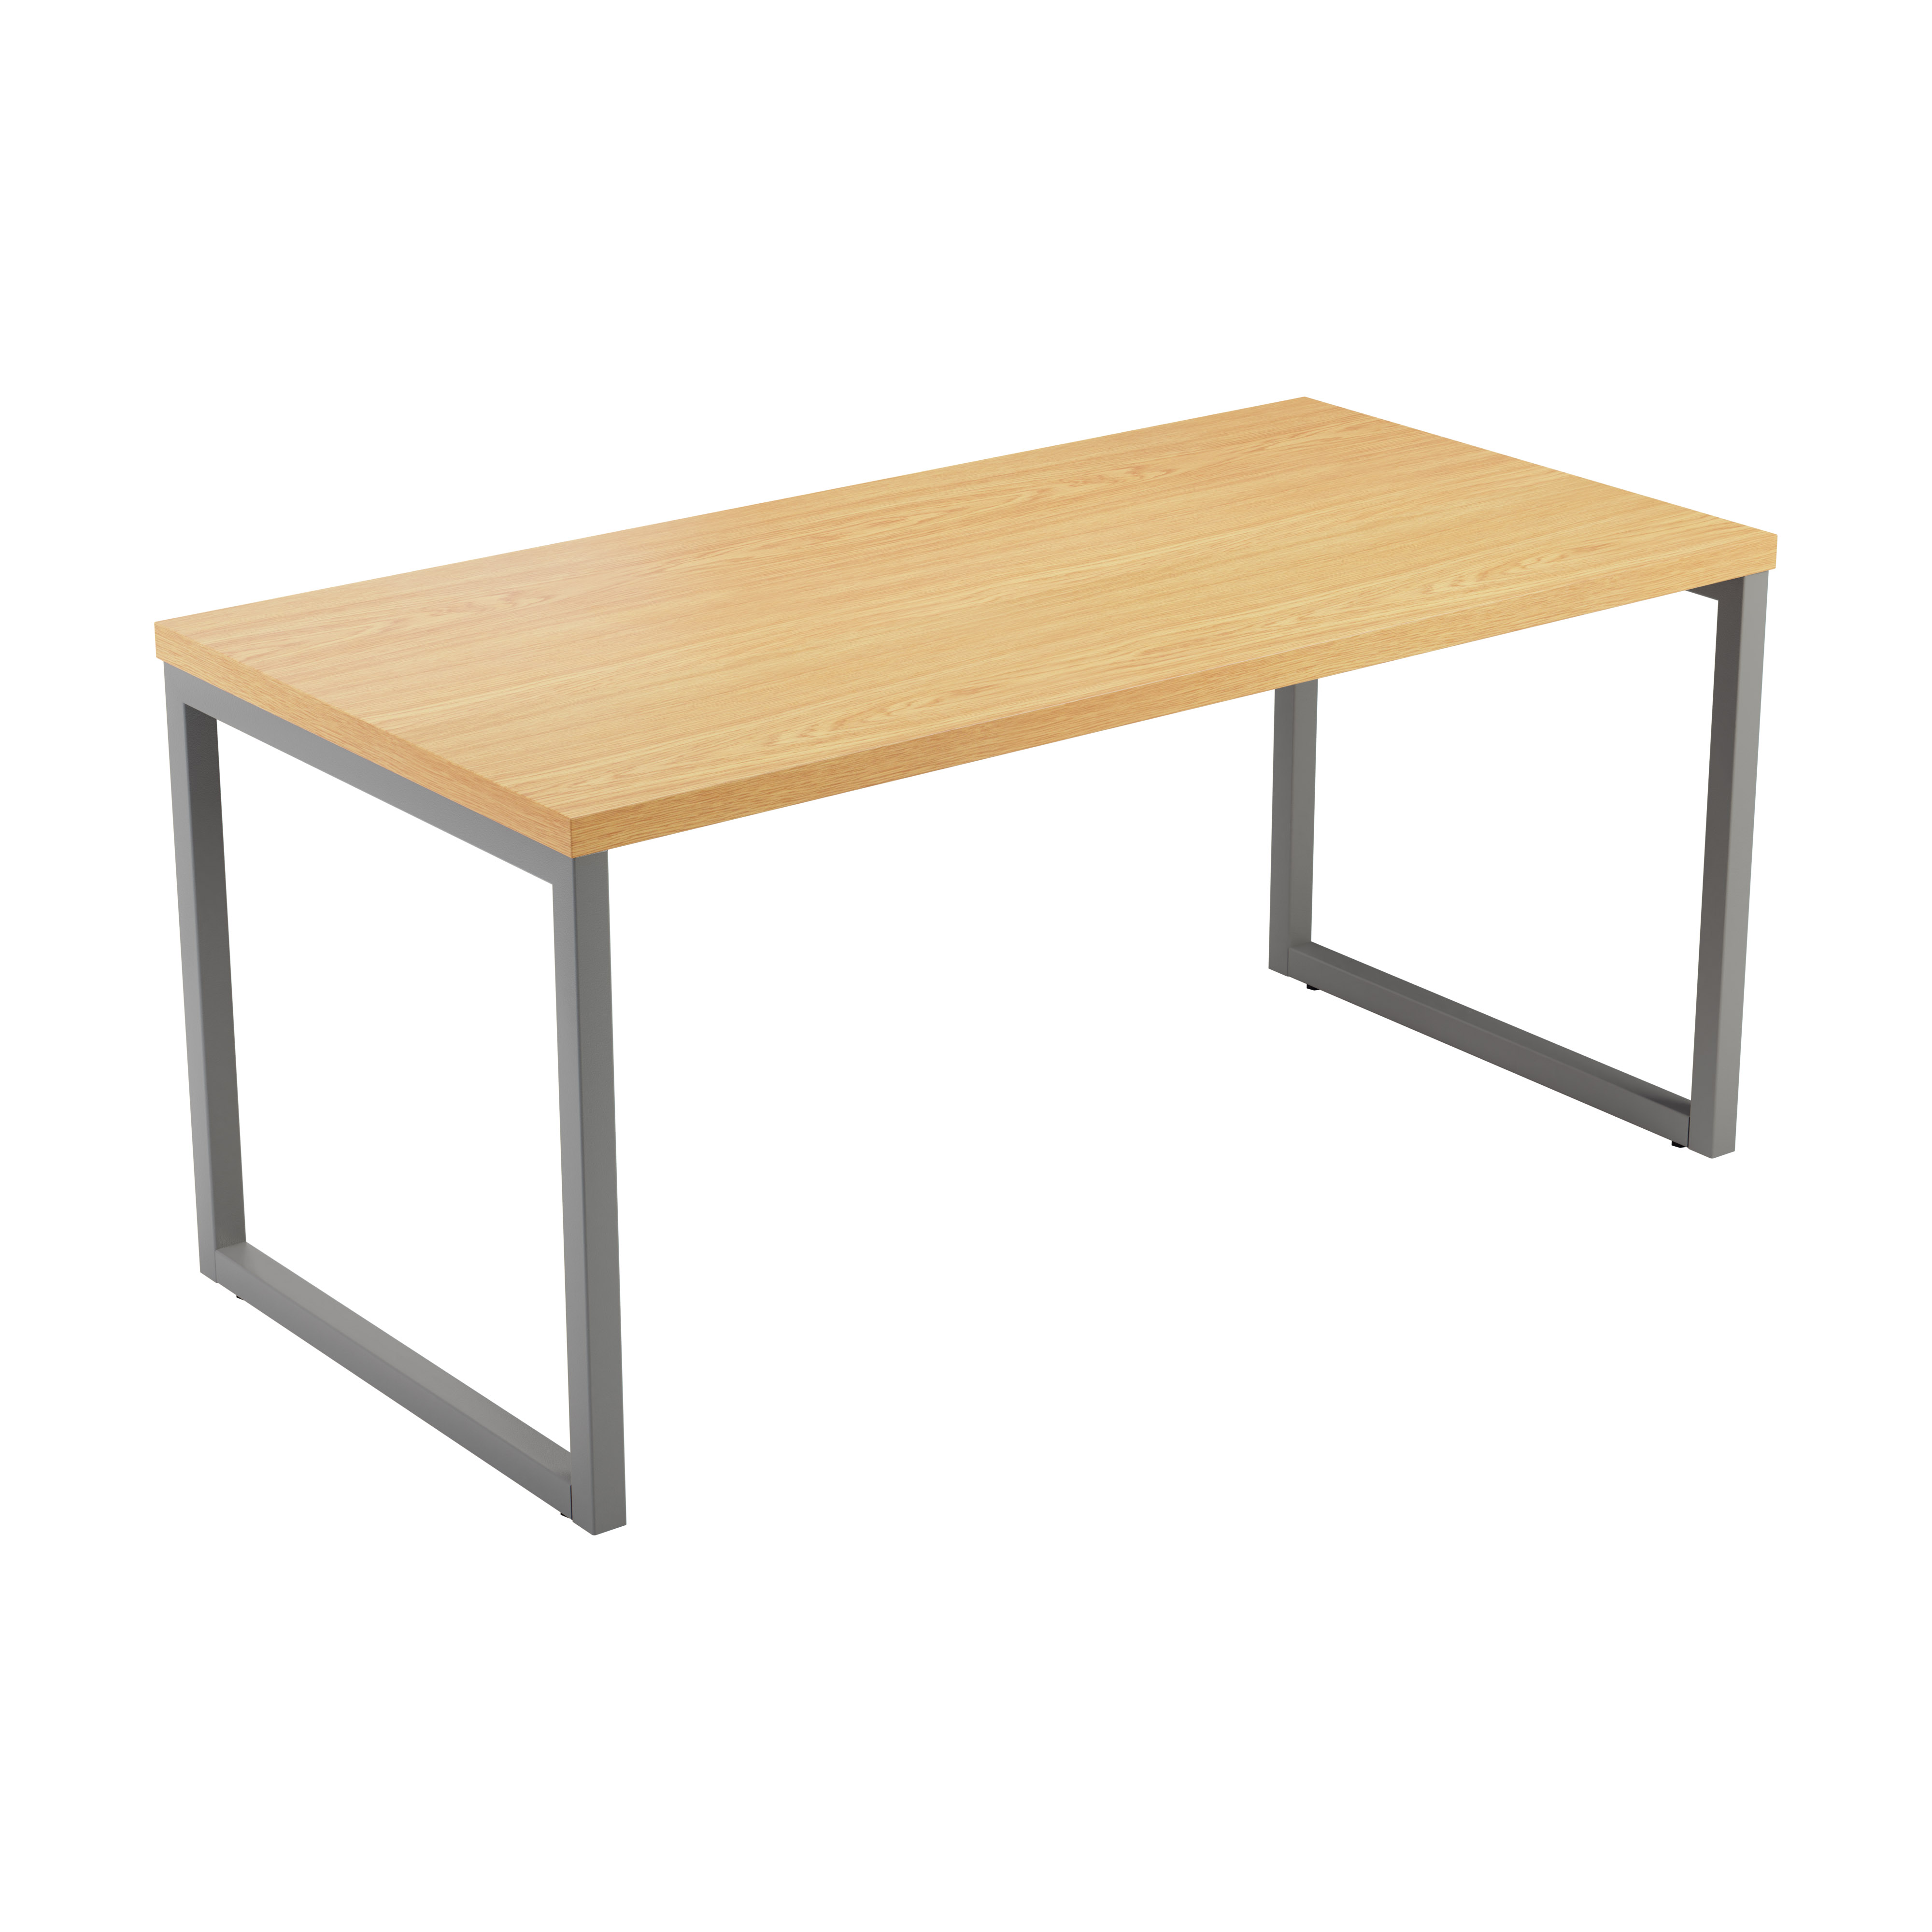 Picnic Low Table 1800 - Oak Top and Silver Legs